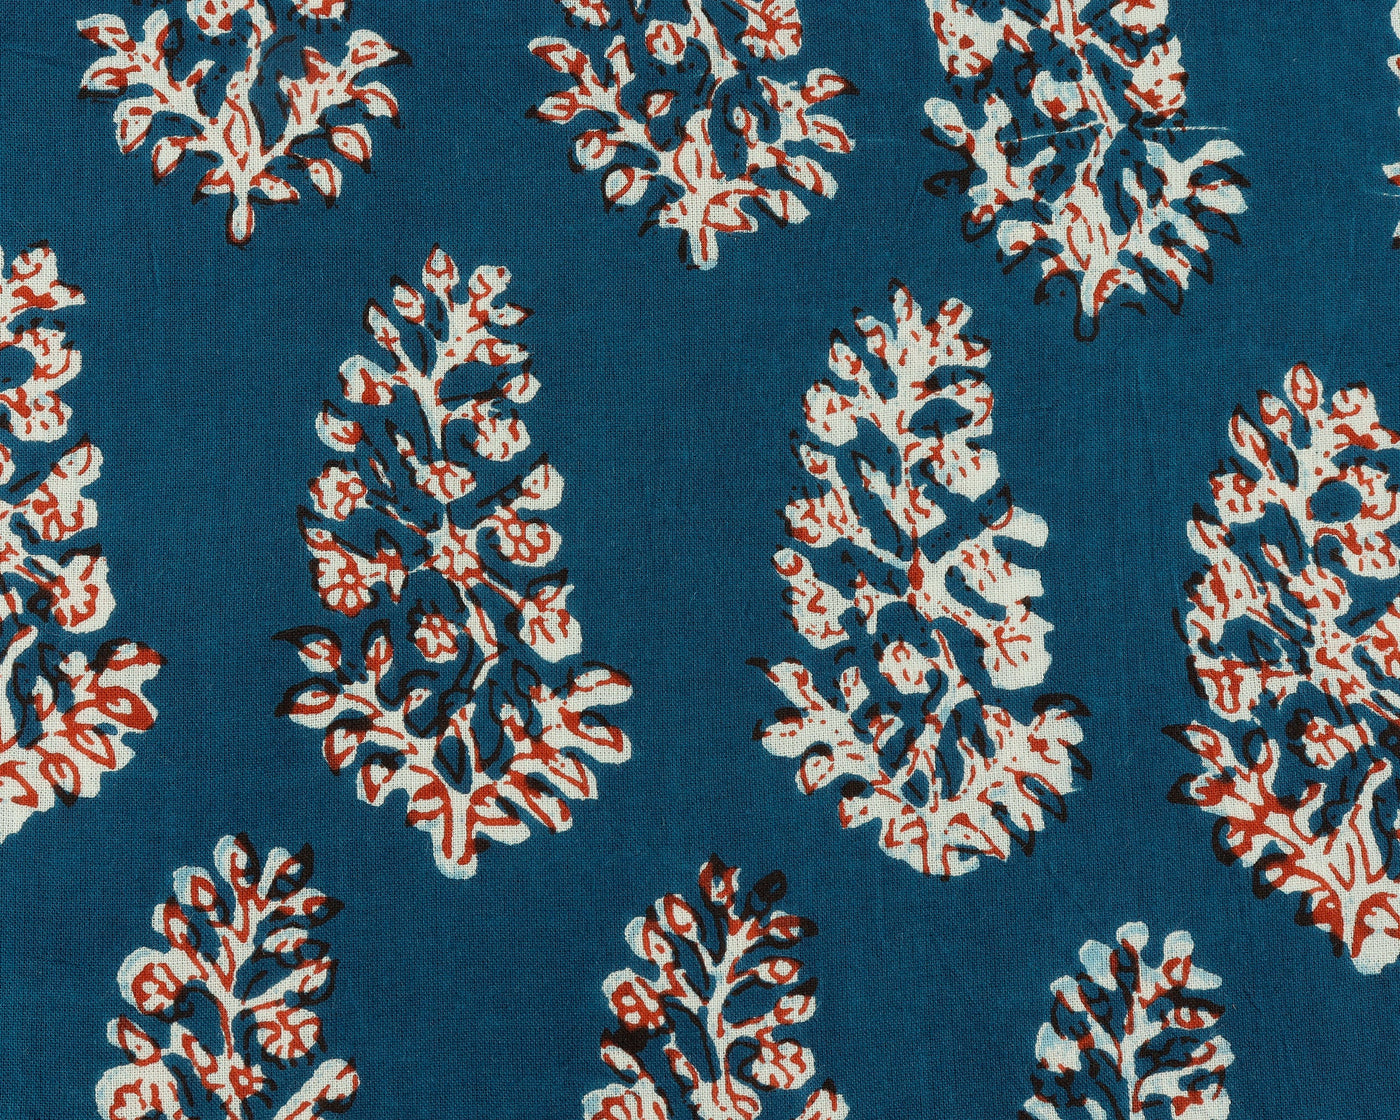 Fabricrush Prussian Blue, Red and White Indian Floral Printed Pure Cotton Cloth Napkins, Christmas Gift, 18x18"Cocktail Napkins, 20x20" Dinner Napkins